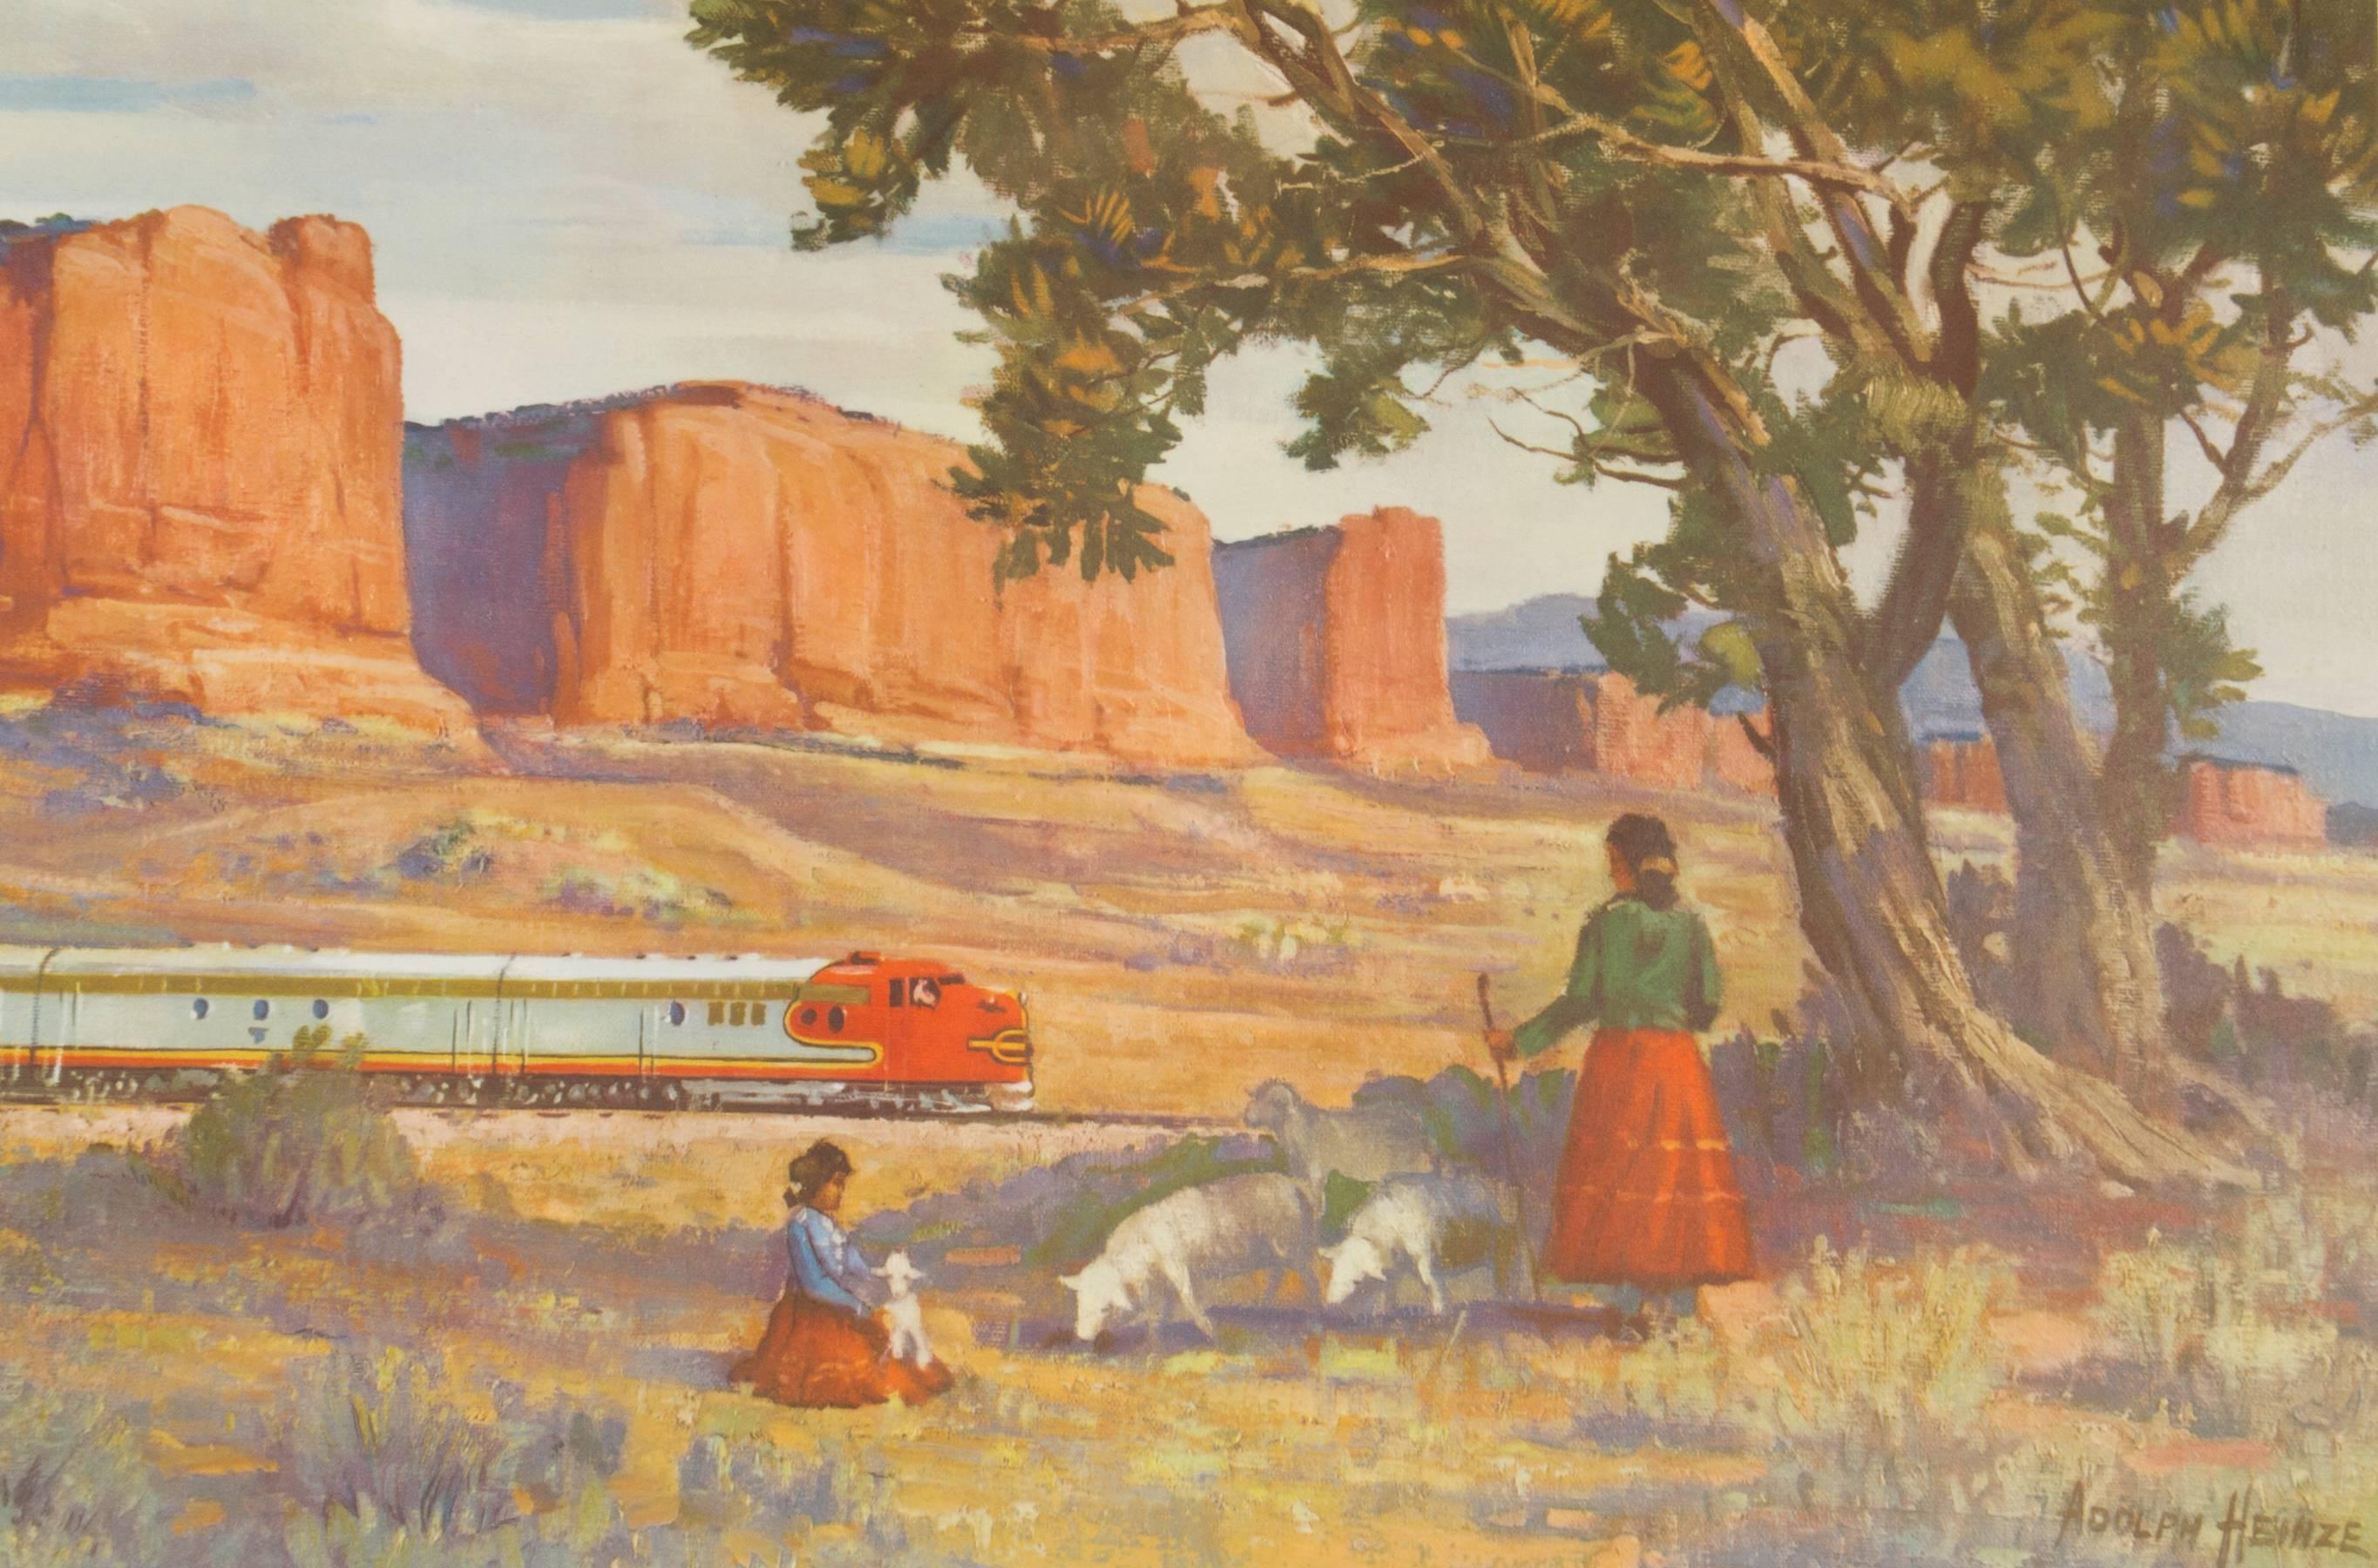 This is an original vintage travel poster by Adolph Heinze of the red cliffs of New Mexico.
Copyrighted 1955, The Atchison, Topeka and Santa Fe Railway is printed on the lower right.
  